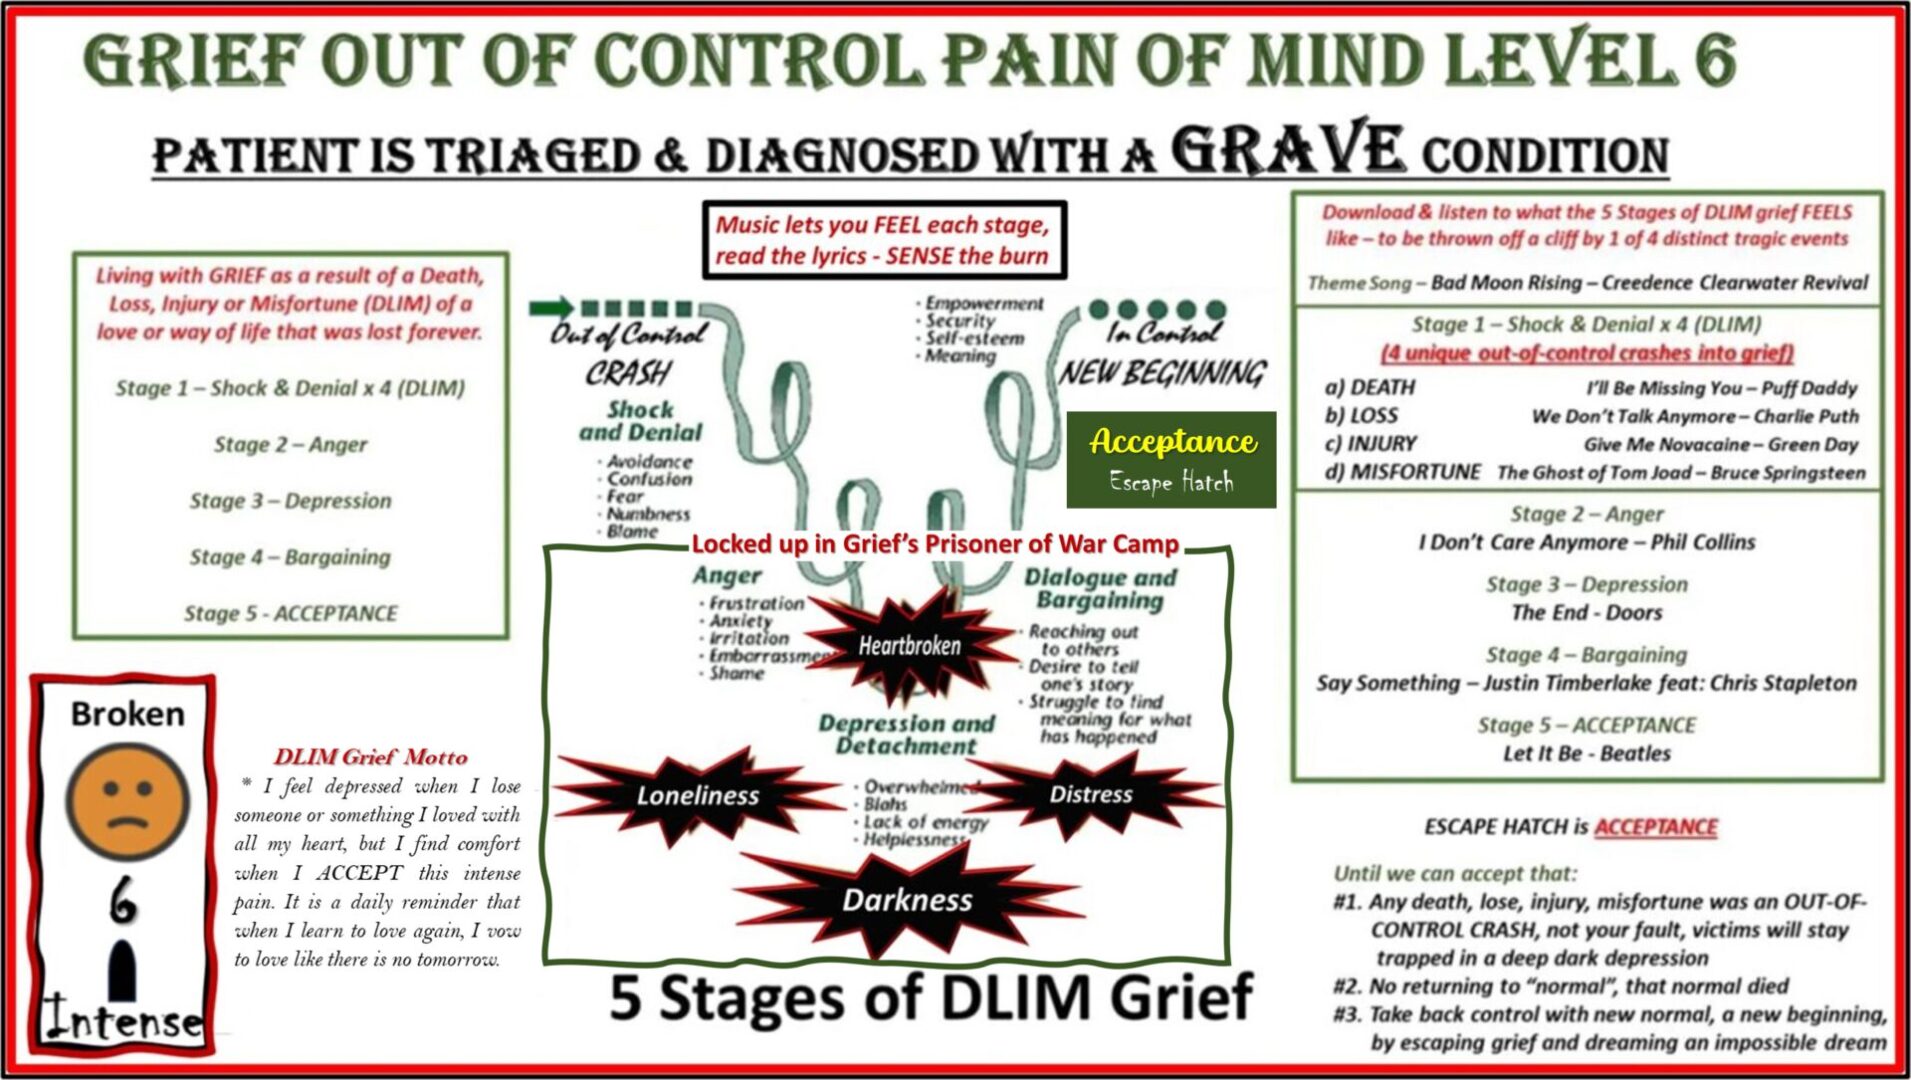 Level 6 - The 5 Stages of Death-Loss-Injury-Misfortune Grief